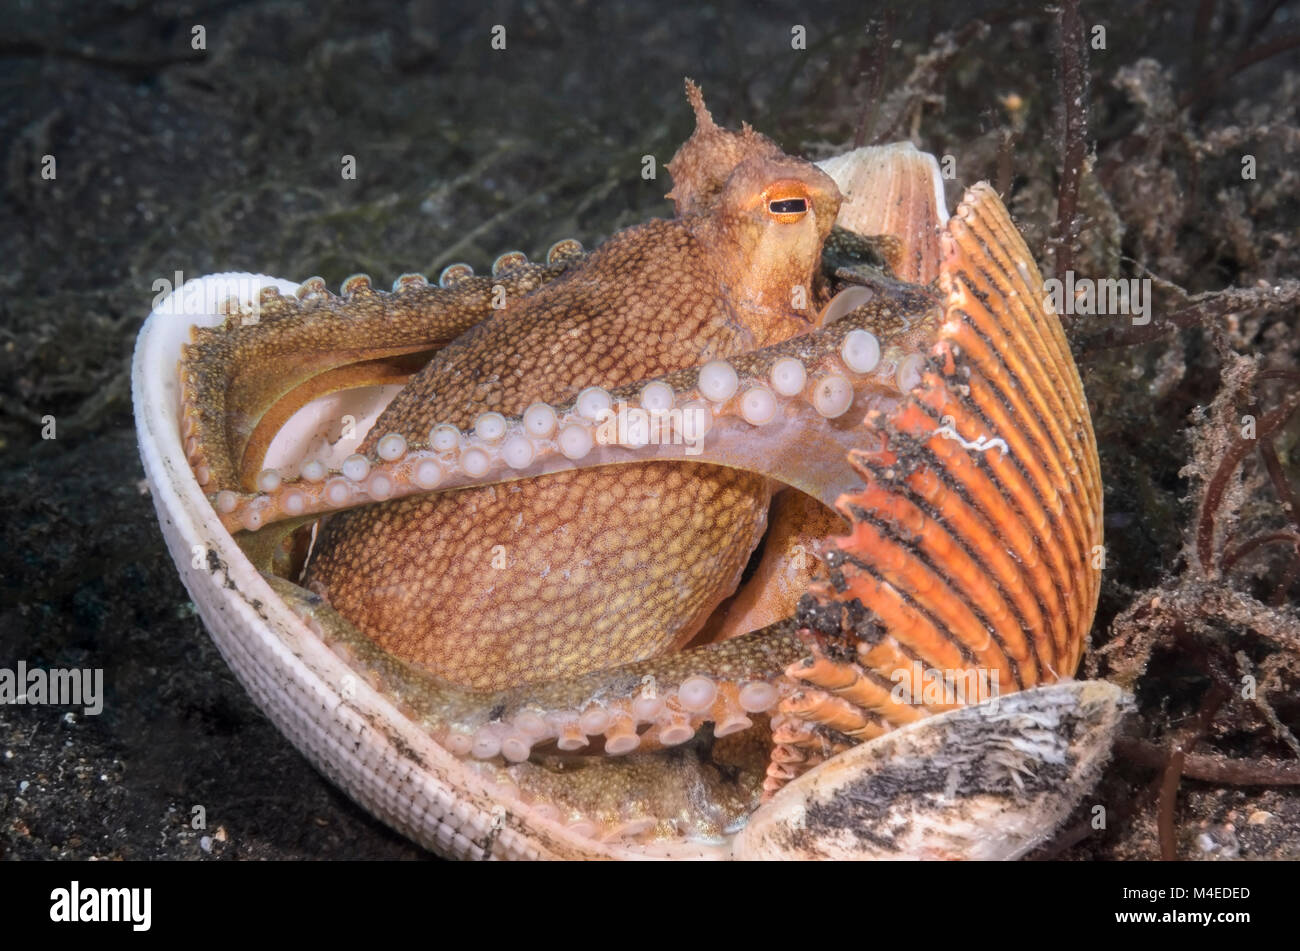 Coconut octopus, Amphioctopus marginatus, using shells for shelter, Lembeh Strait, North Sulawesi, Indonesia, Pacific Stock Photo